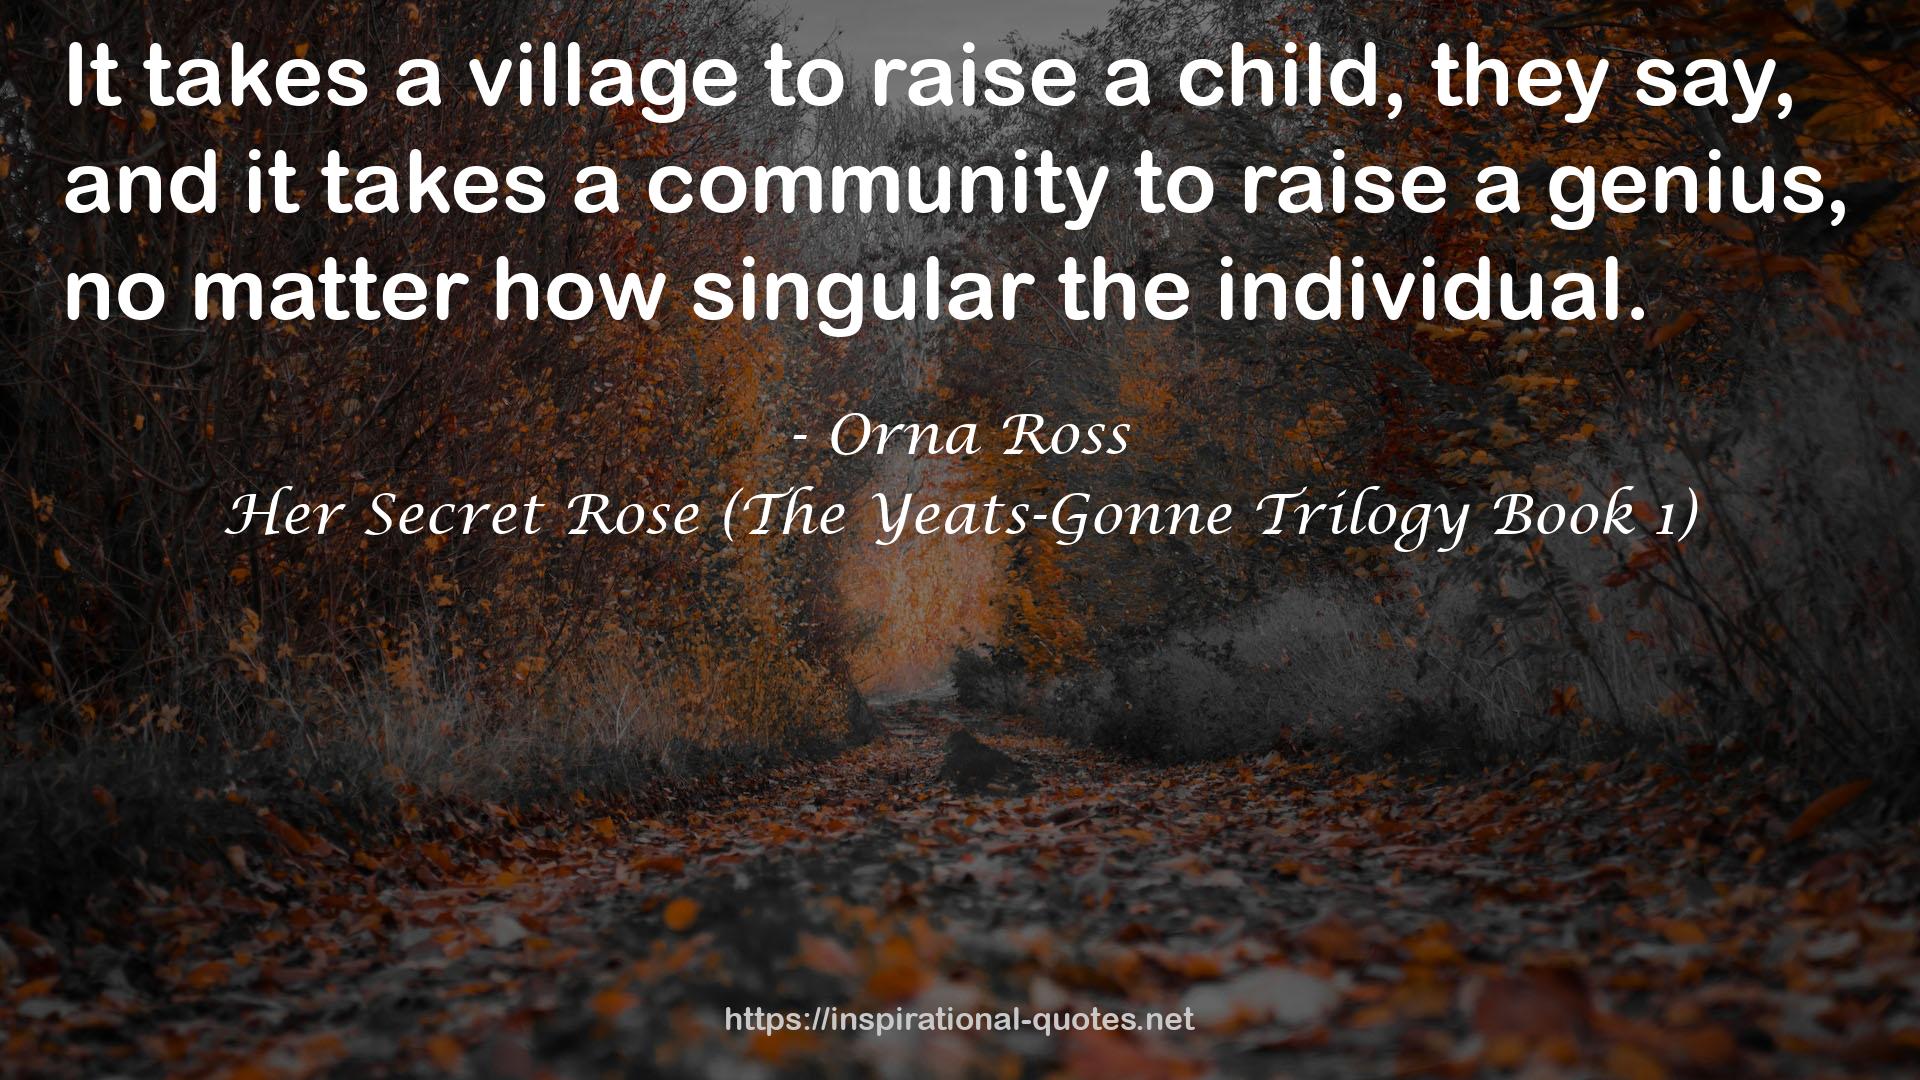 Her Secret Rose (The Yeats-Gonne Trilogy Book 1) QUOTES